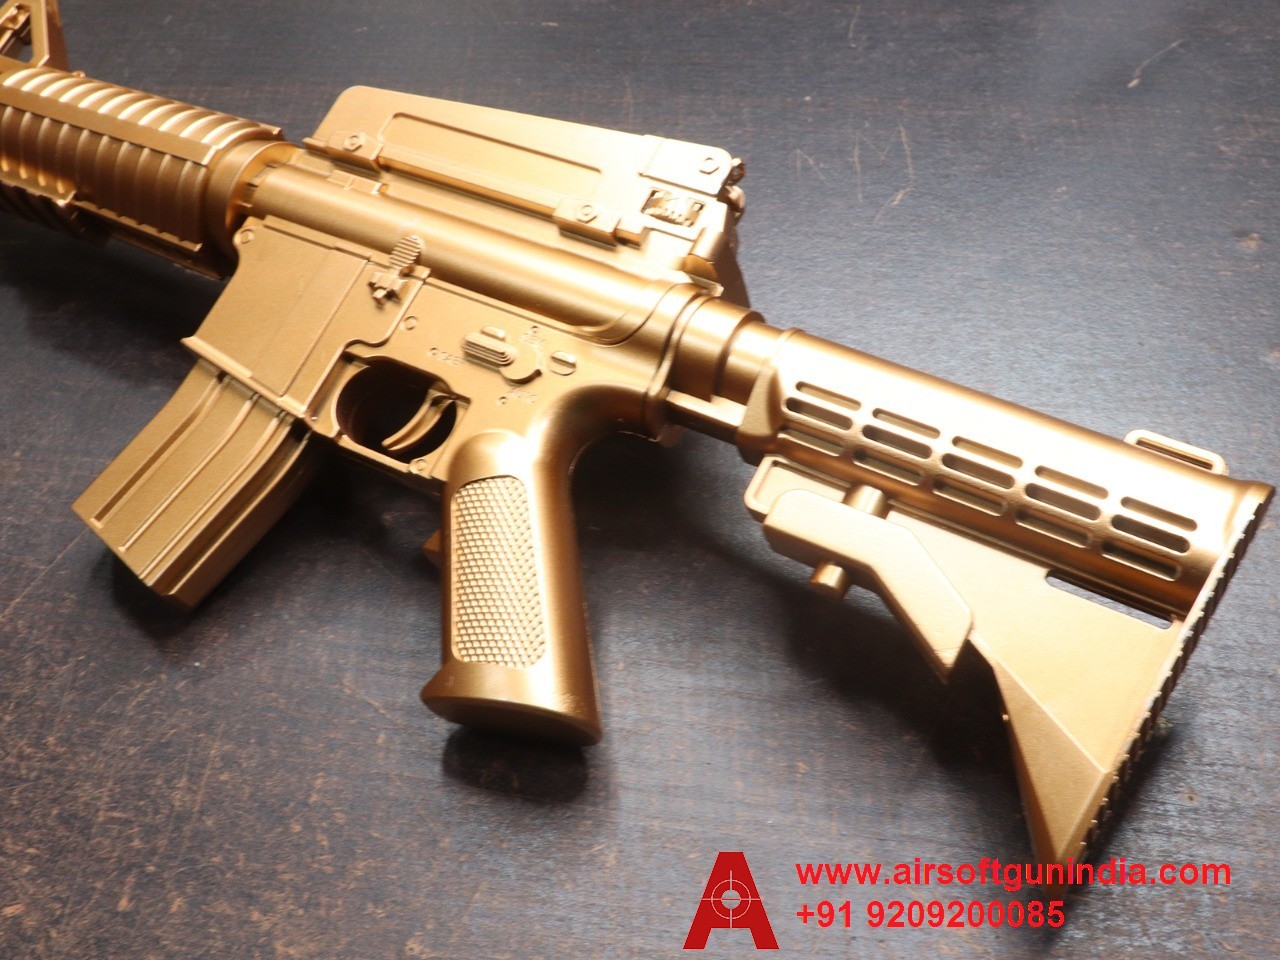 Golden M16 Airsoft Mini Toy Rifle By Airsoft Gun India